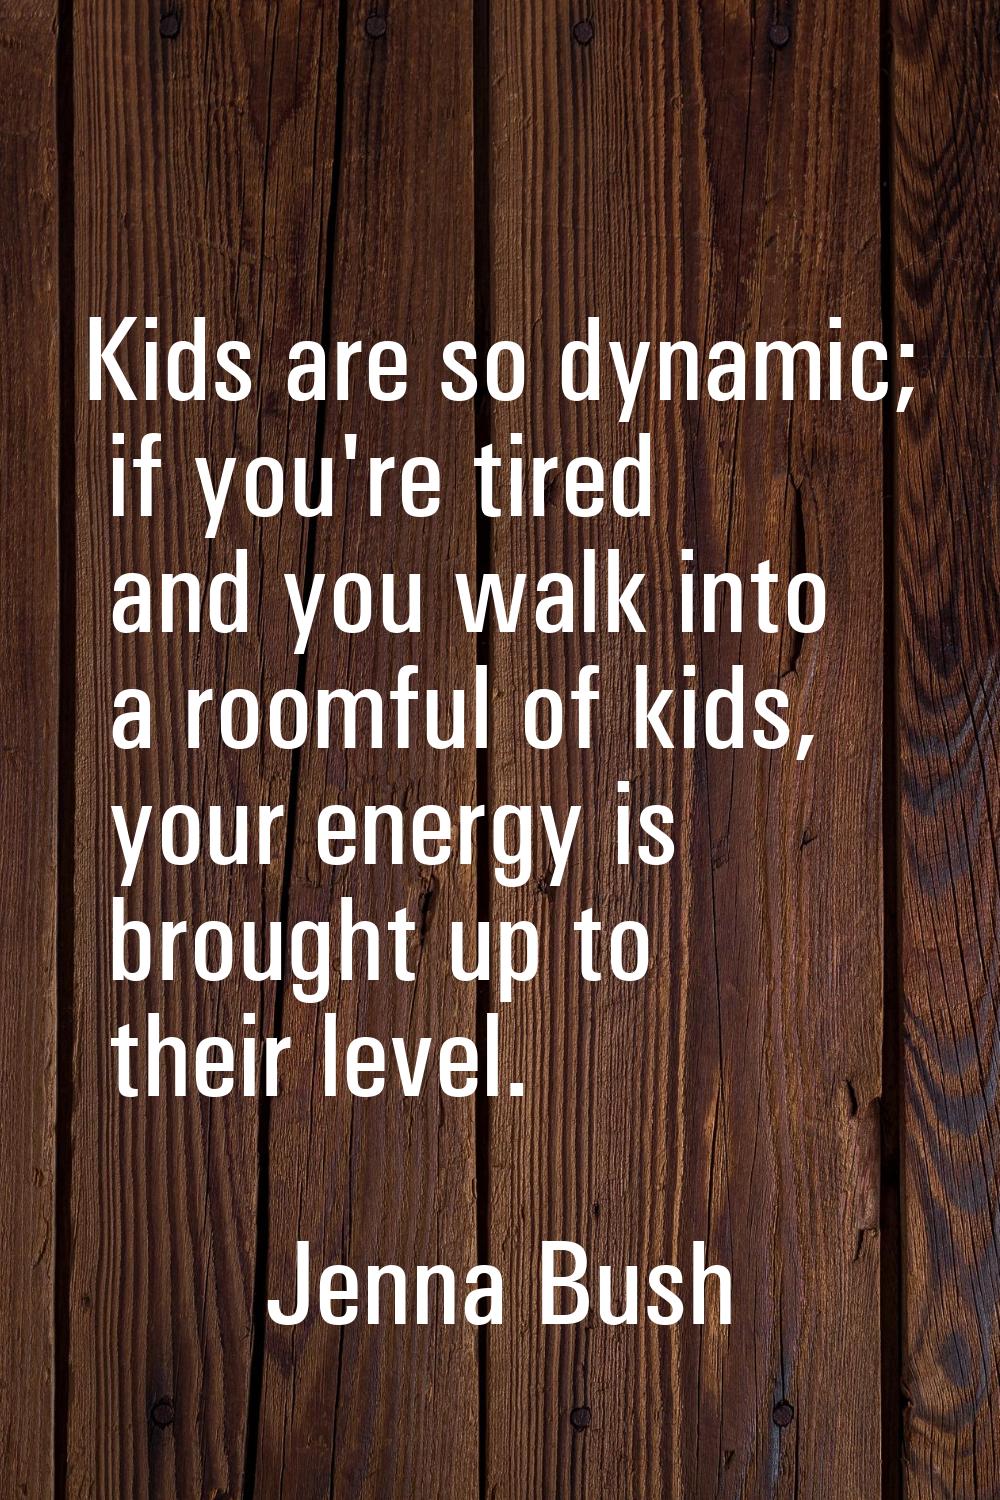 Kids are so dynamic; if you're tired and you walk into a roomful of kids, your energy is brought up